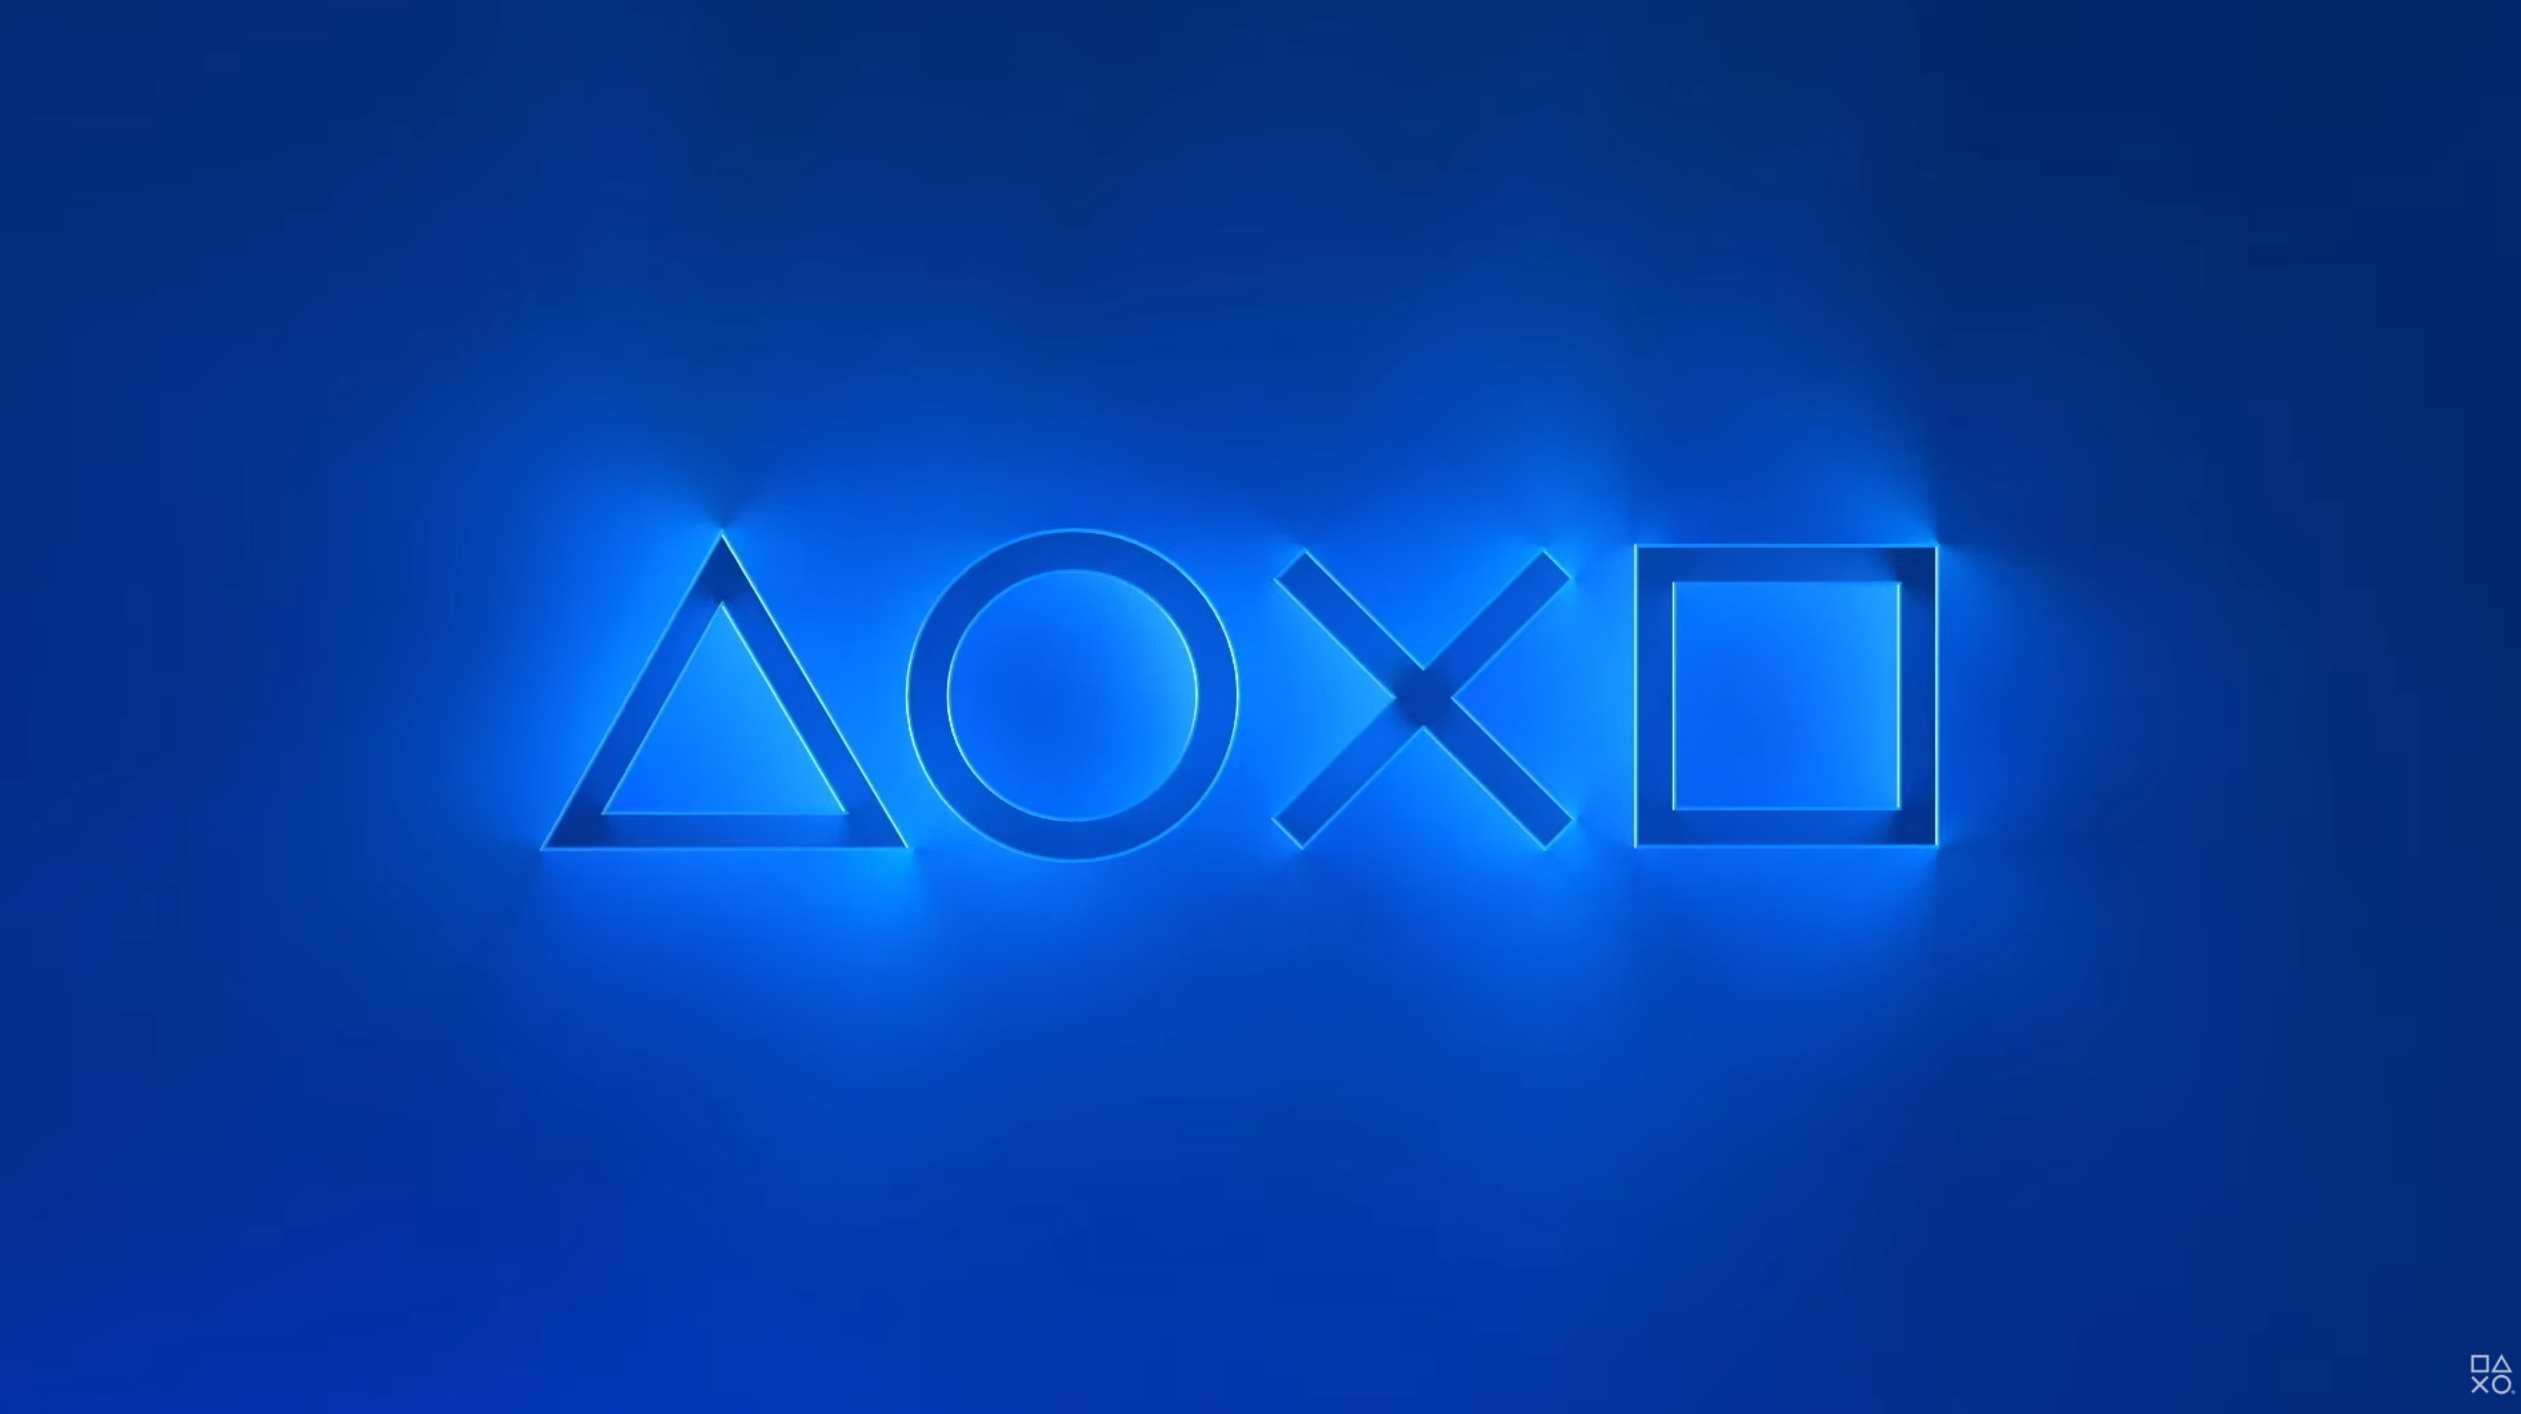 Watch the September PlayStation 5 Showcase livestream here